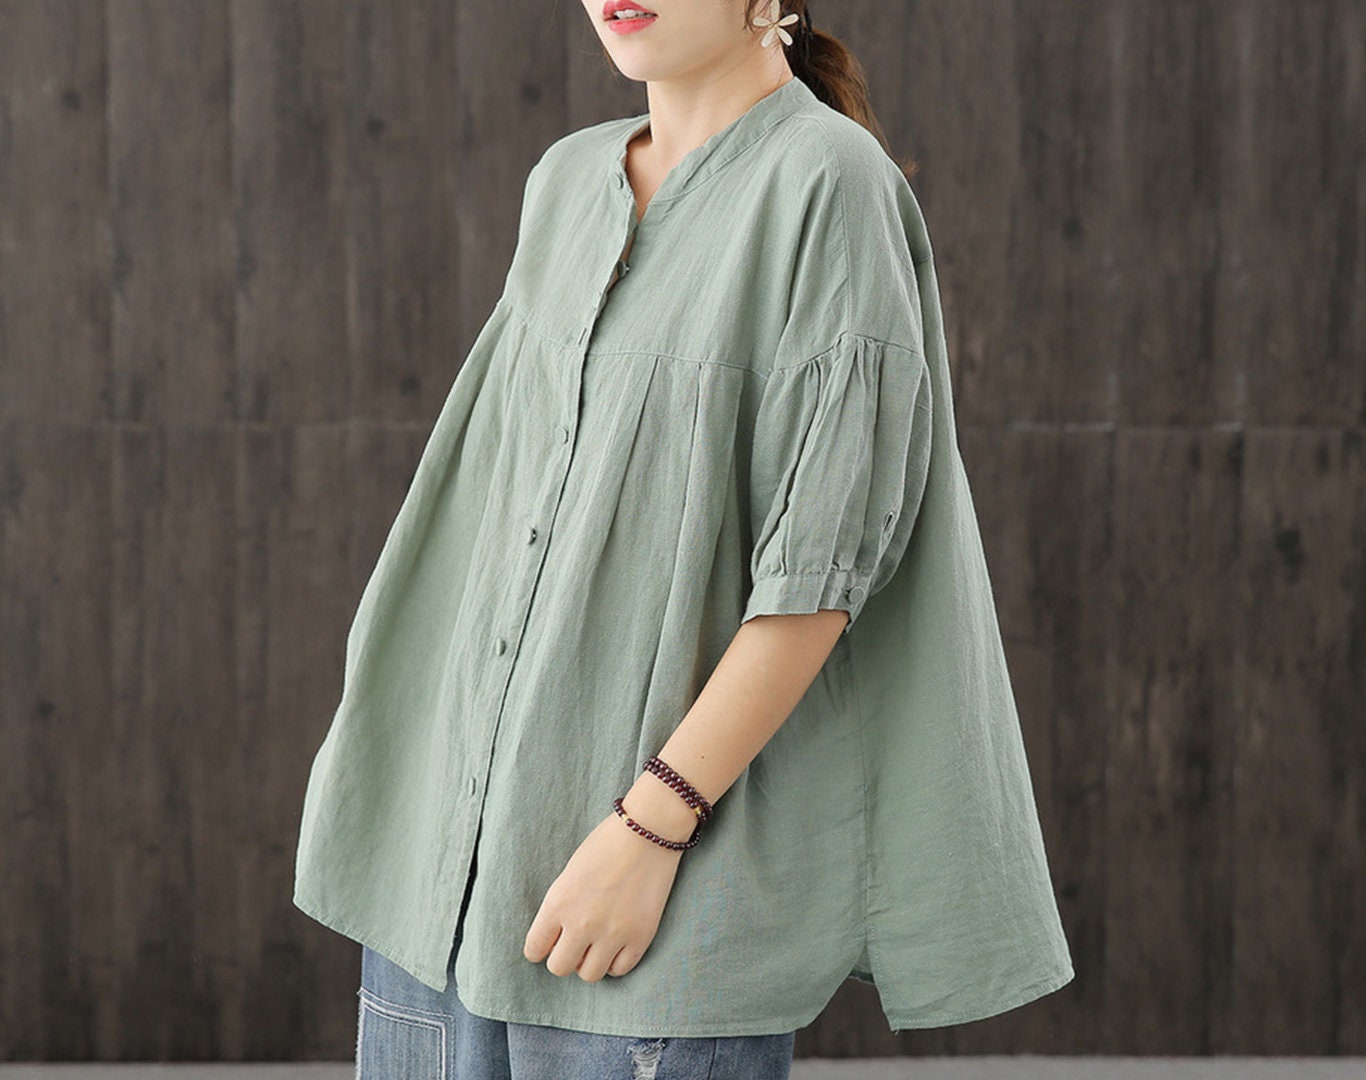 Tops for Women,womens Summer Tops,womens Loose Top,green Tops,large Size  Tops,gifts for Her,loose Fit Top,casual Tops,linen Summer Shirt 